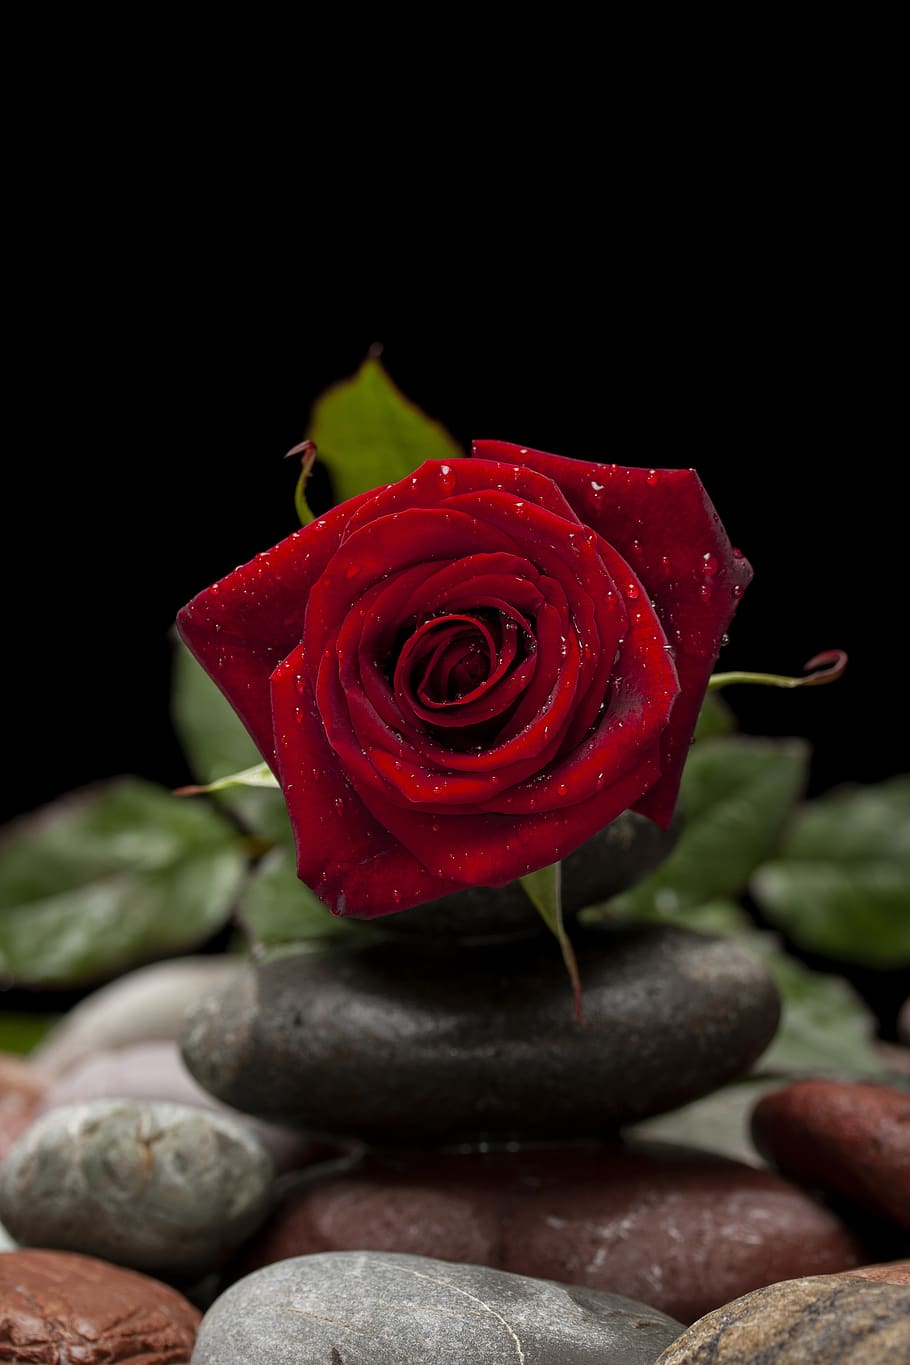 Rose Day Photography HD Wallpapers - Wallpaper Cave